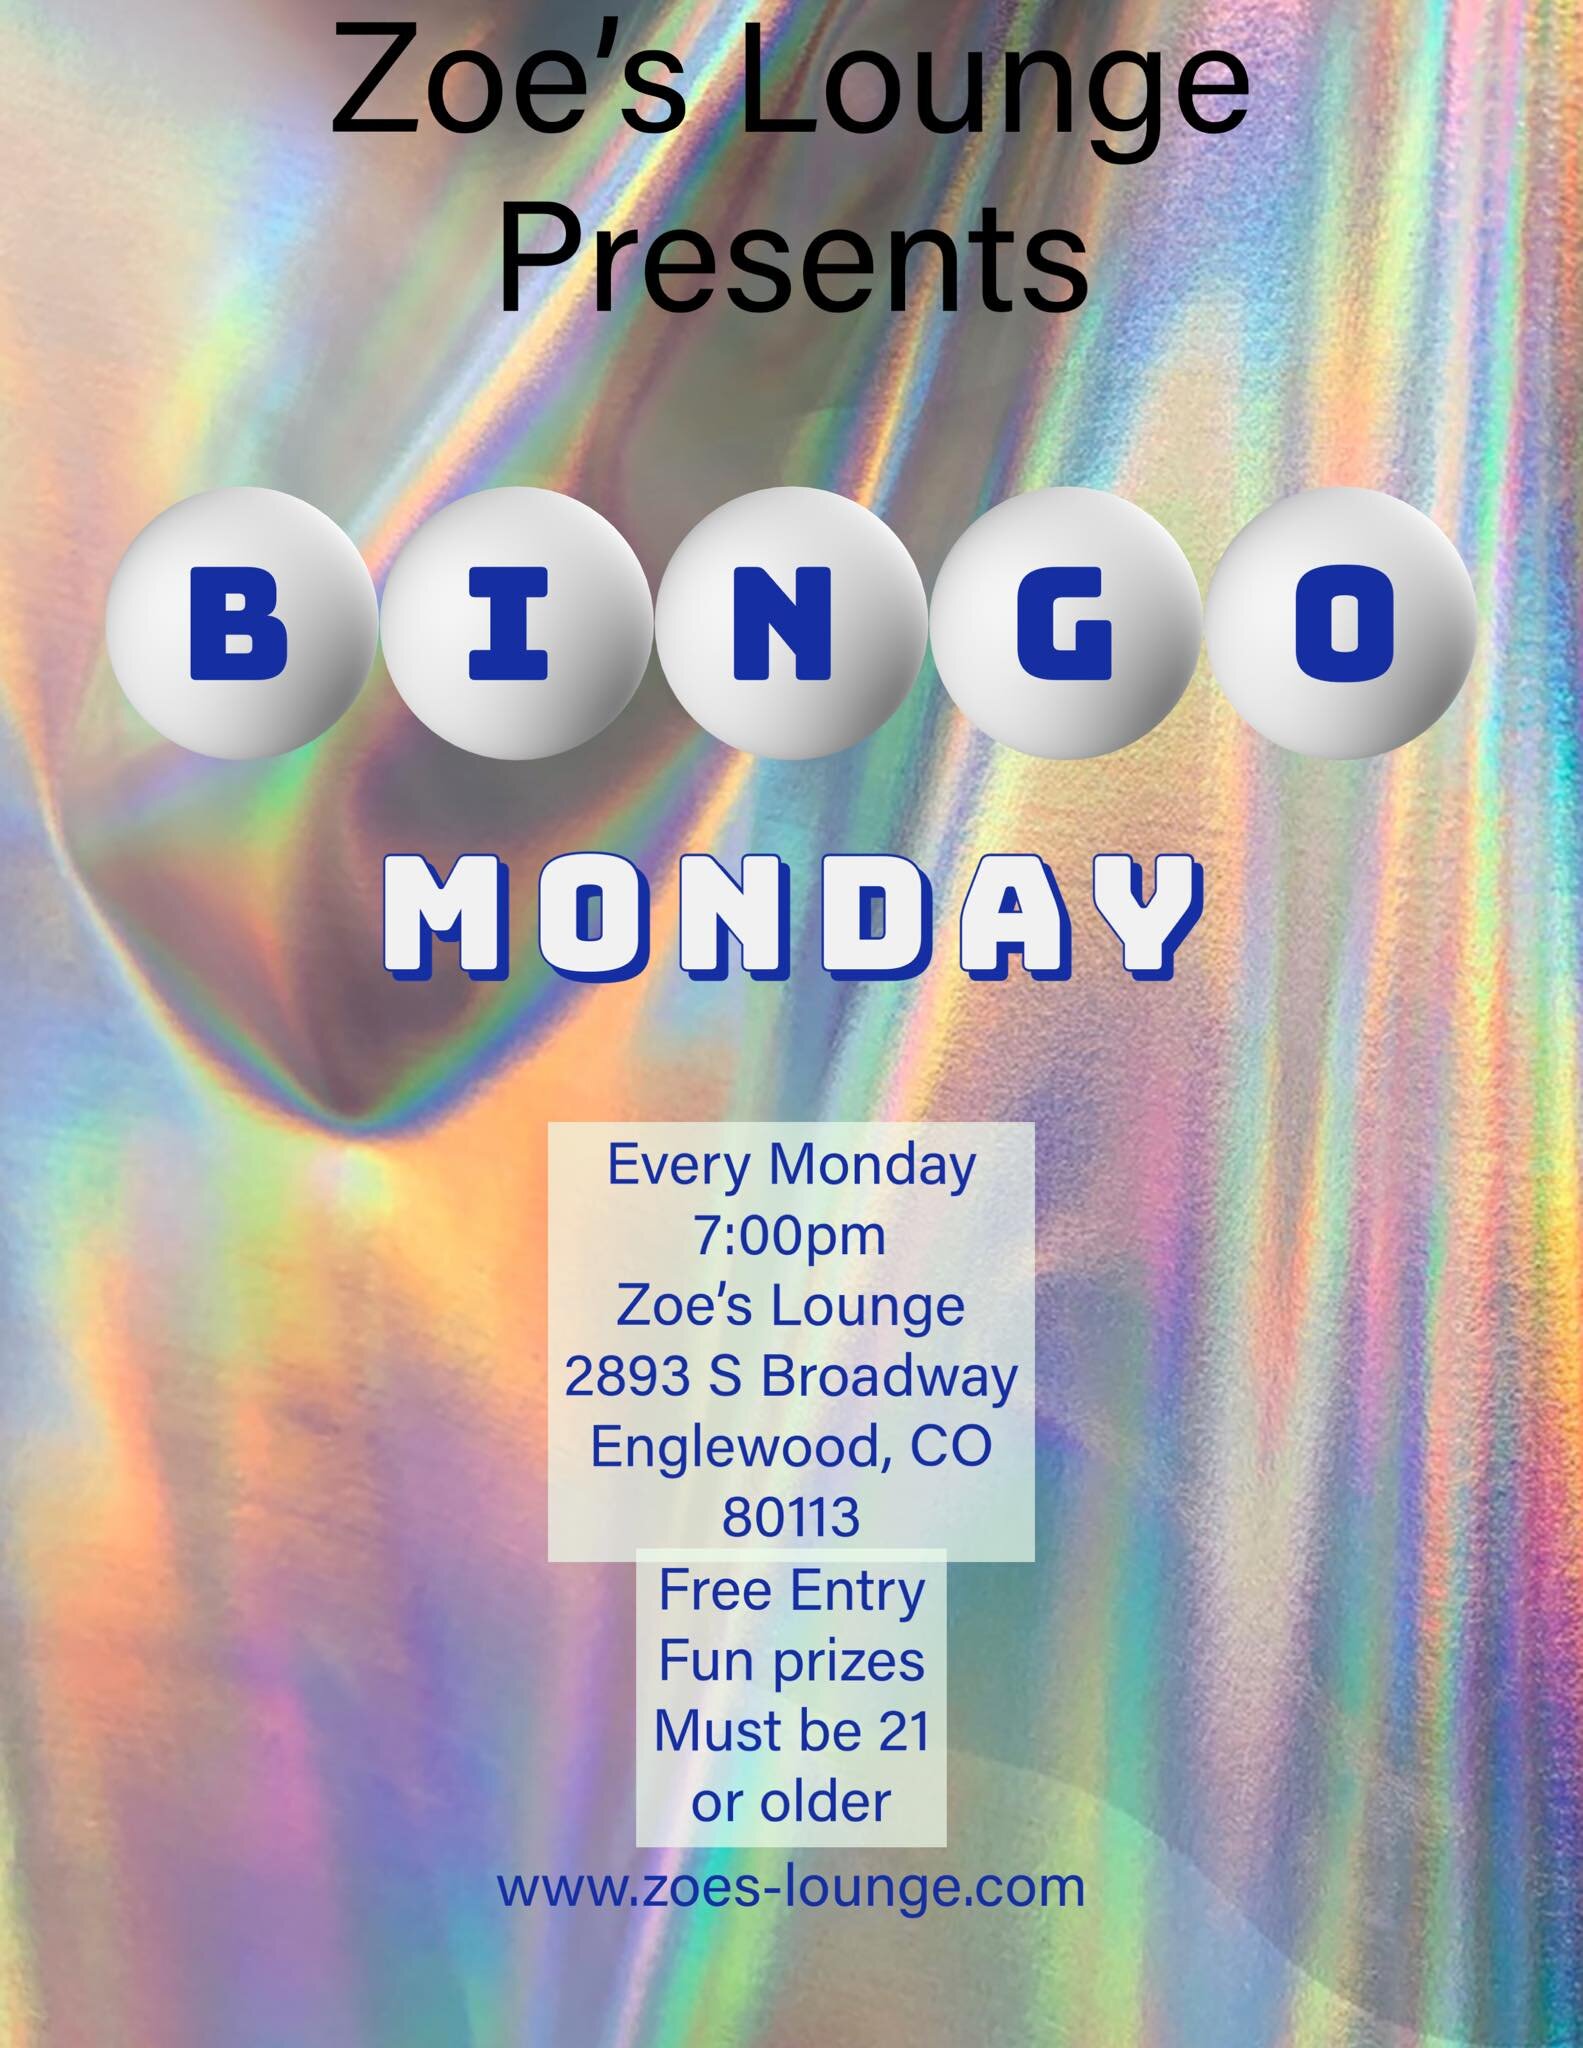 Come play Bingo with us tonight. 7:00pm free to play. Must be 21 or older to play.
See you at Zoe&rsquo;s!